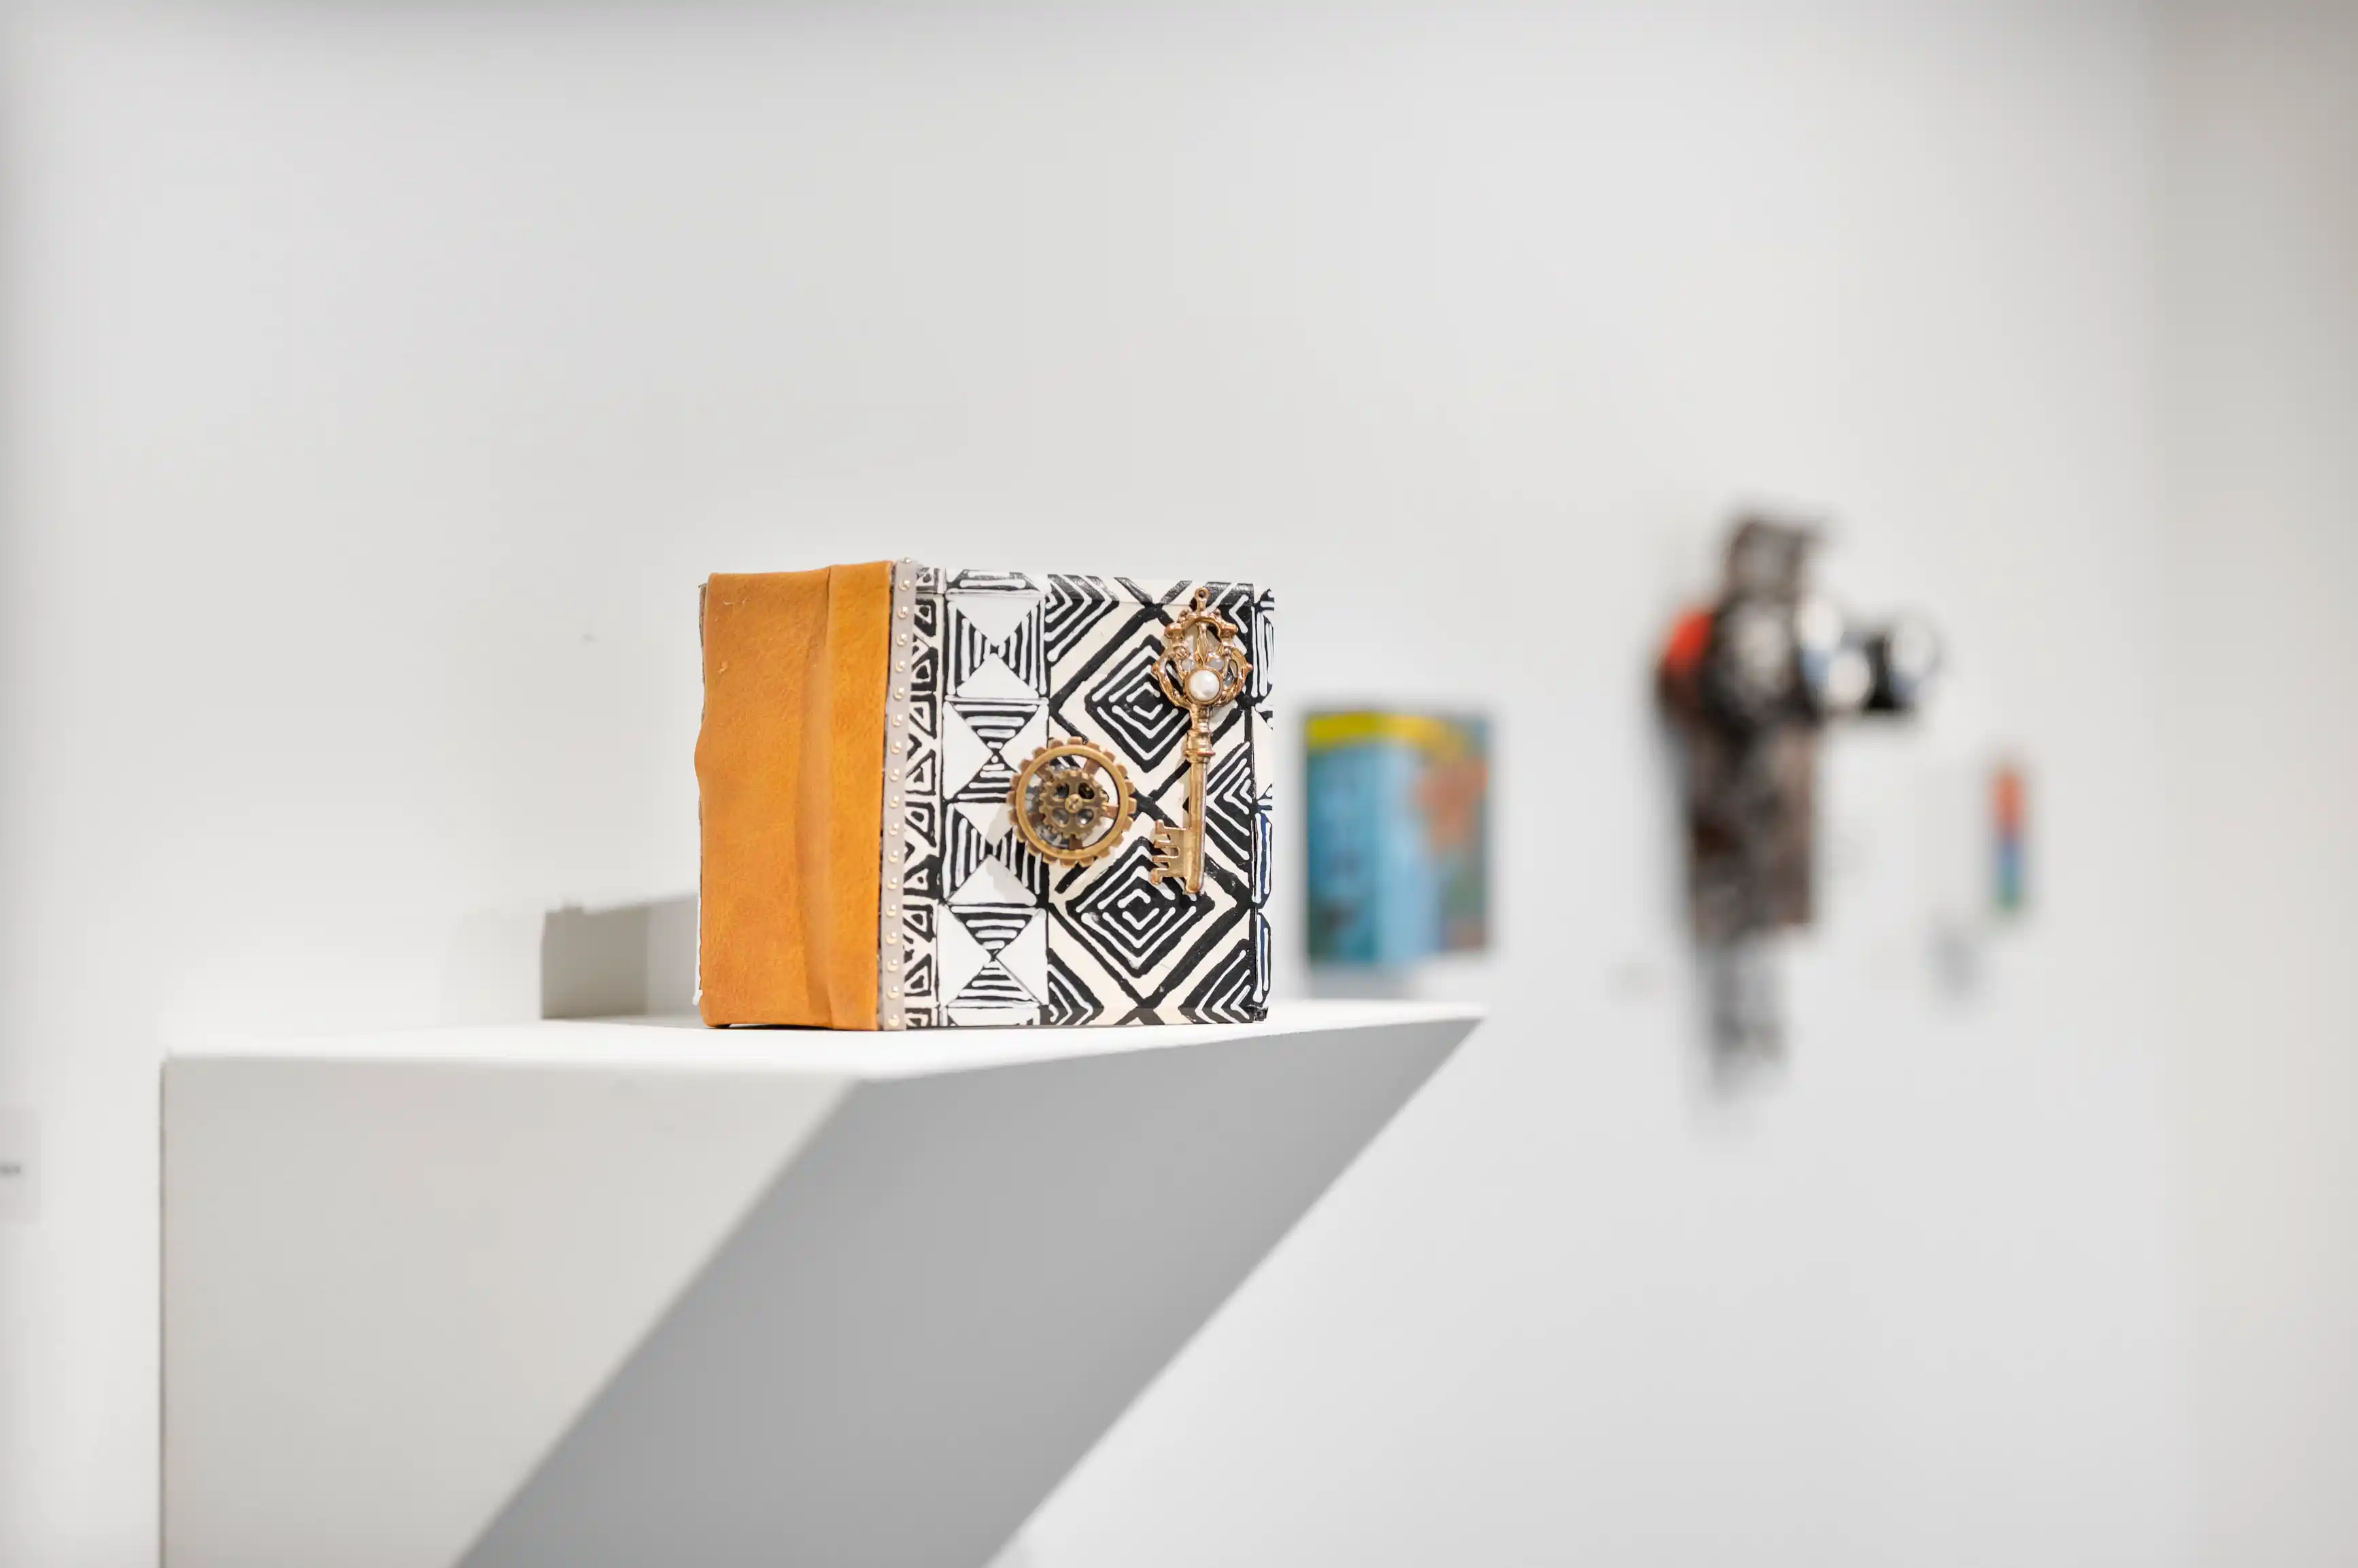 Art installation with a patterned box and blurry background featuring gallery pieces.